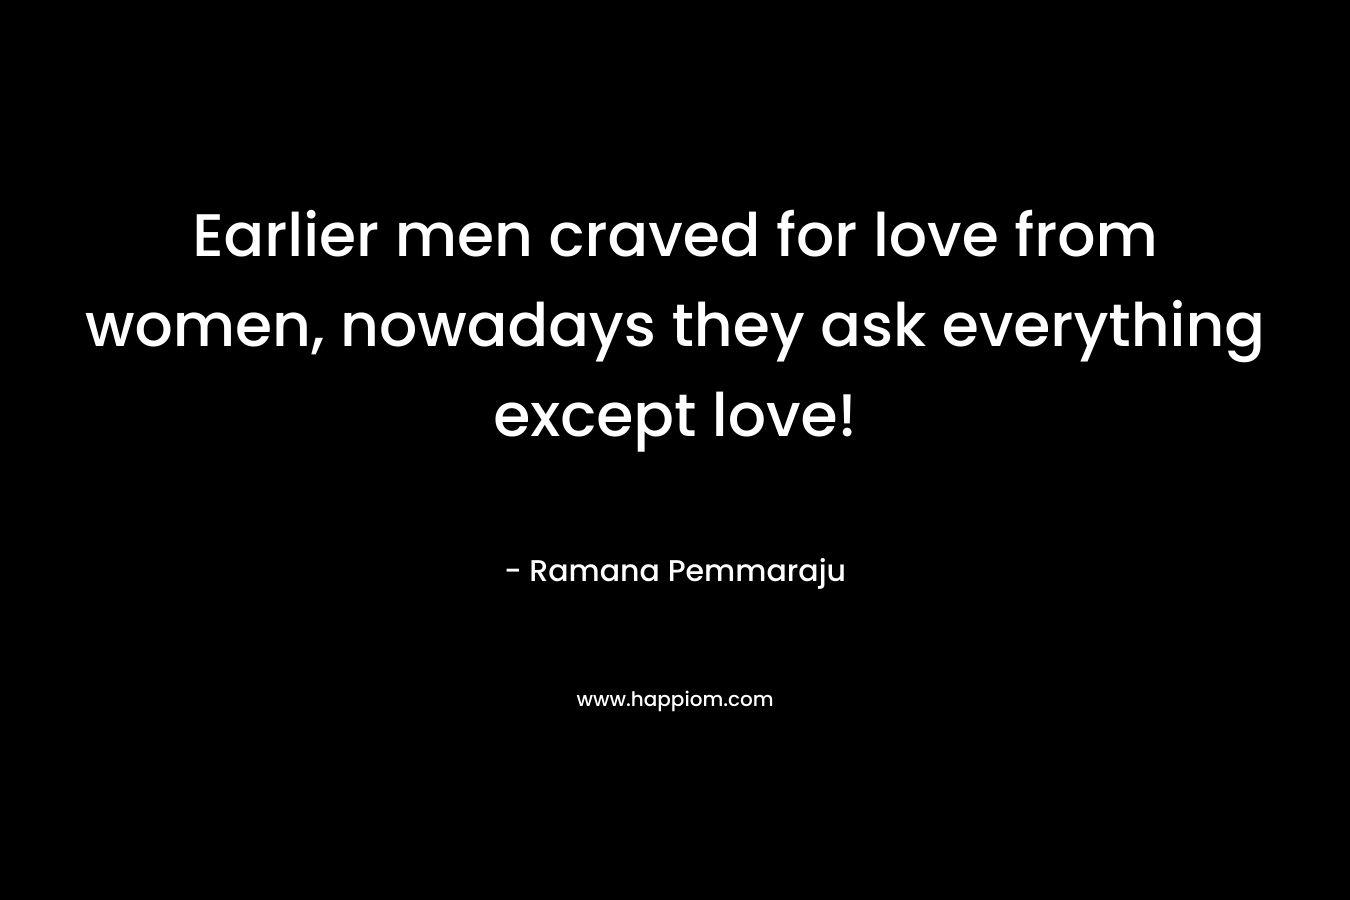 Earlier men craved for love from women, nowadays they ask everything except love!